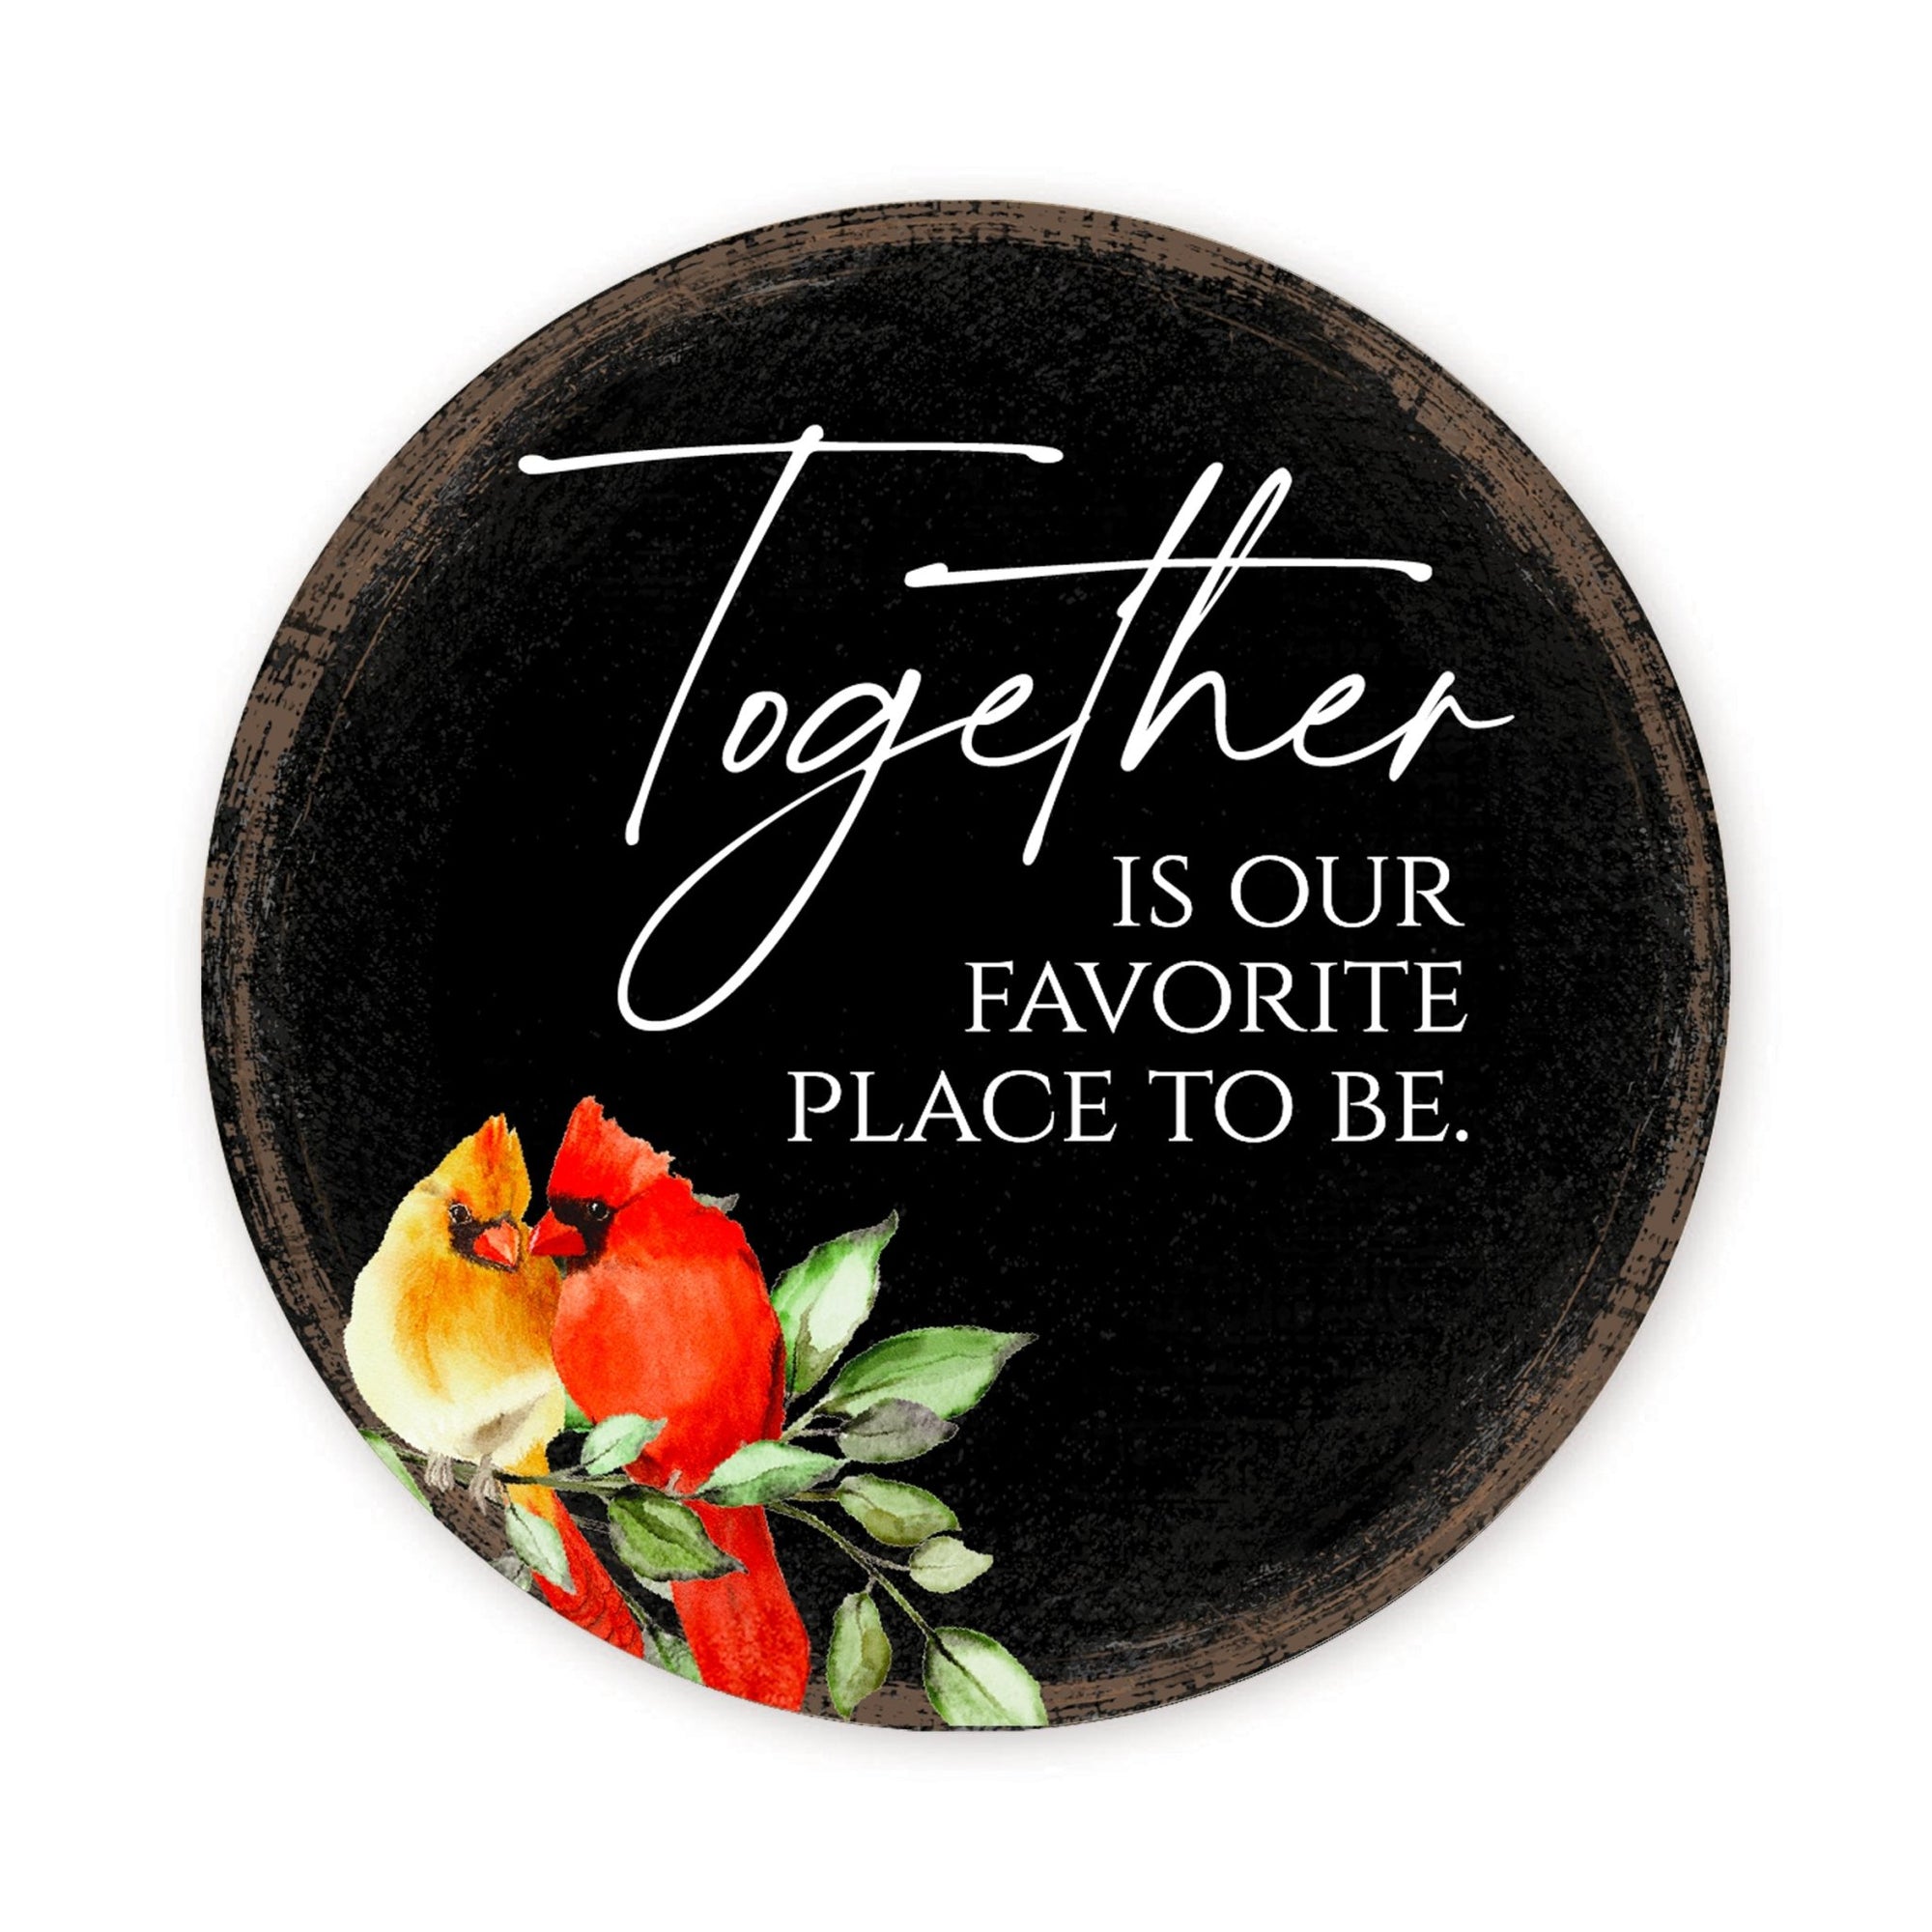 Vintage-Inspired Cardinal Wooden Magnet Printed With Everyday Inspirational Verses Gift Ideas - Together Is Our - LifeSong Milestones